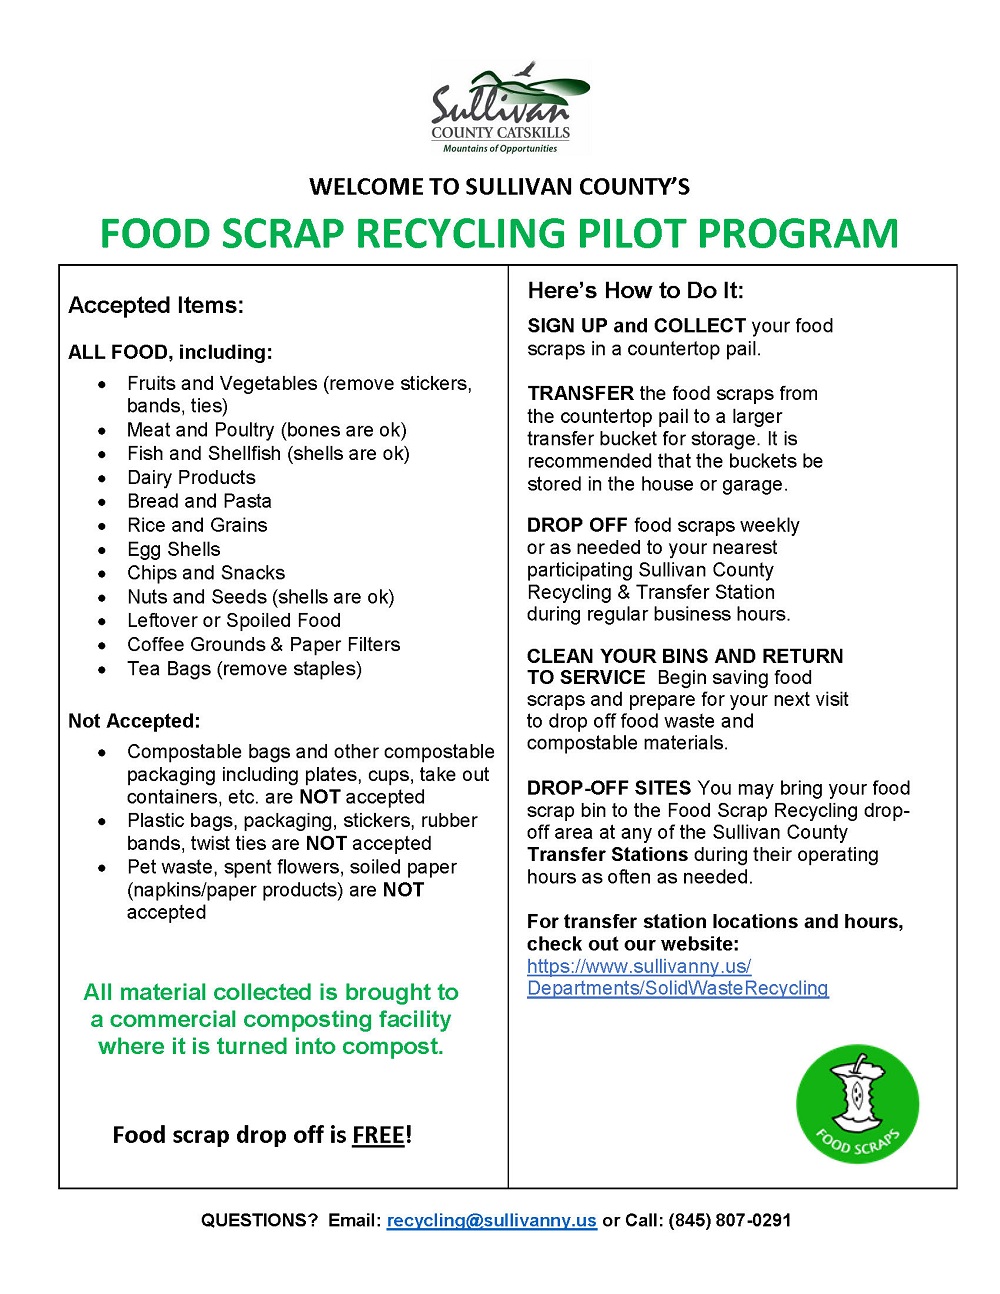 COMPOST GIVEAWAY - May 4th-9th - Pictou County Solid Waste